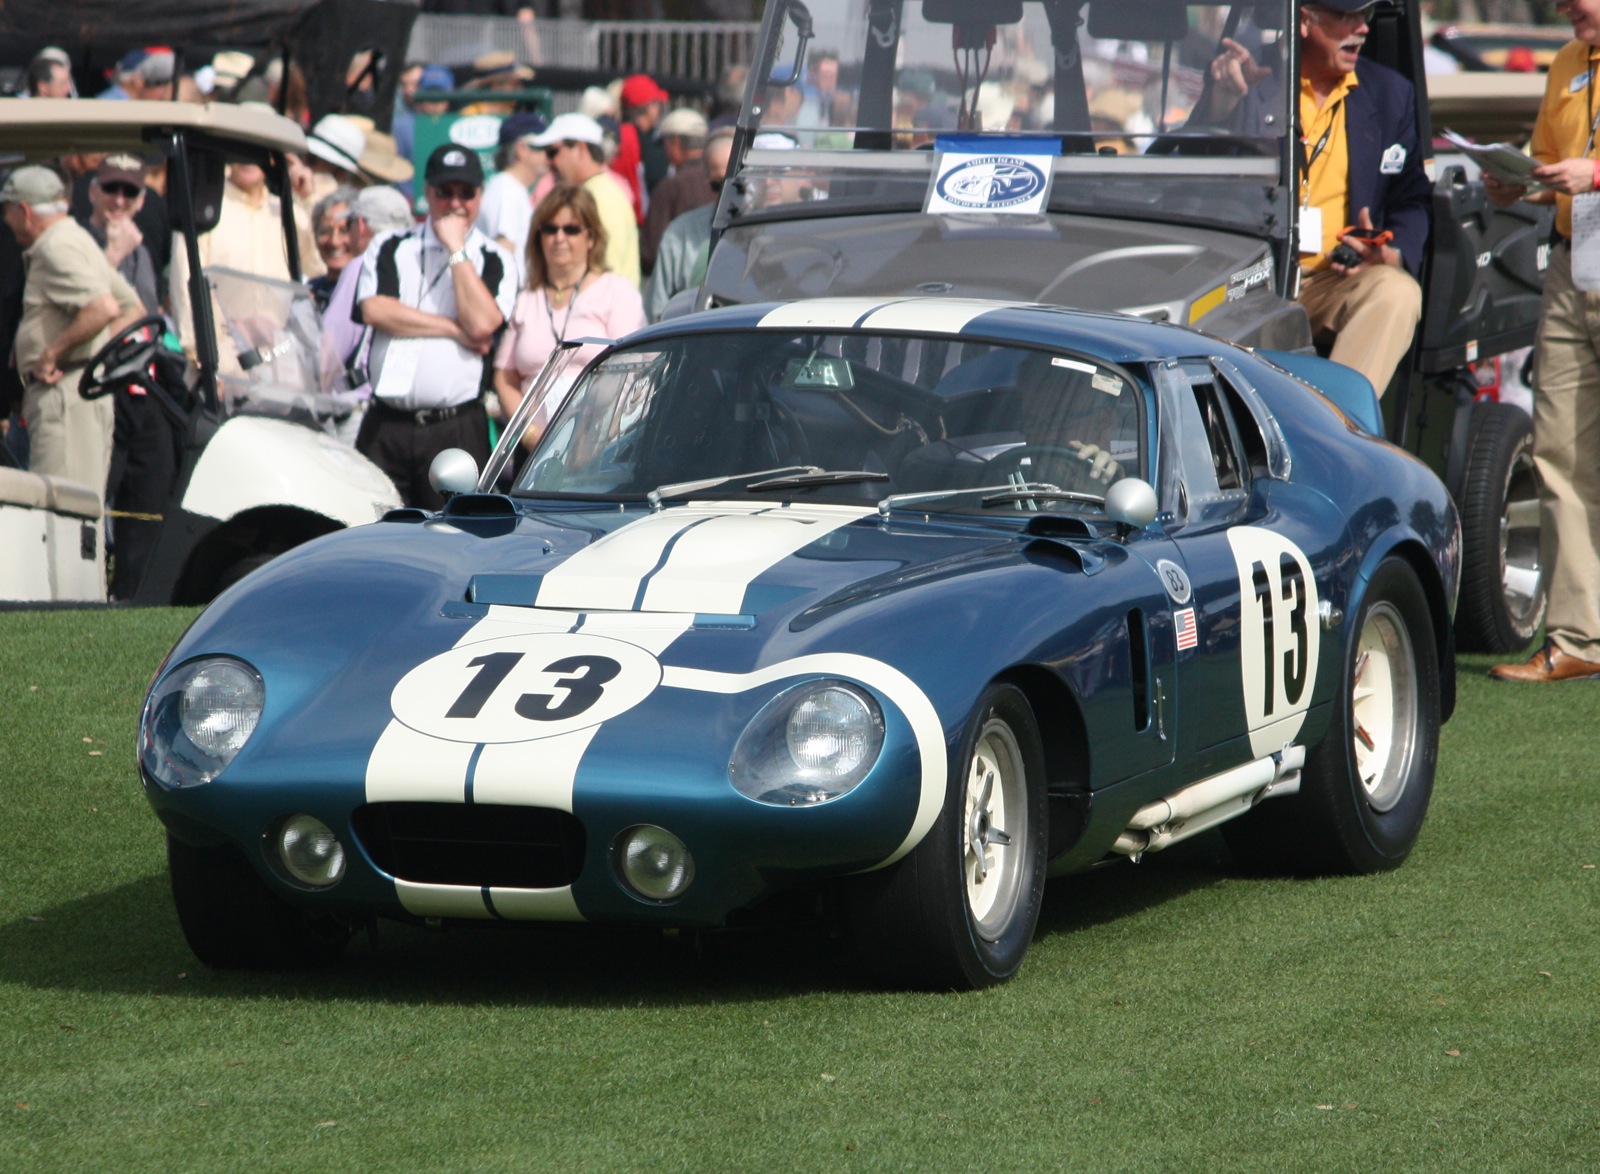 Shelby Daytona Coupe Is First National Historic Vehicle Register Inductee1600 x 1174